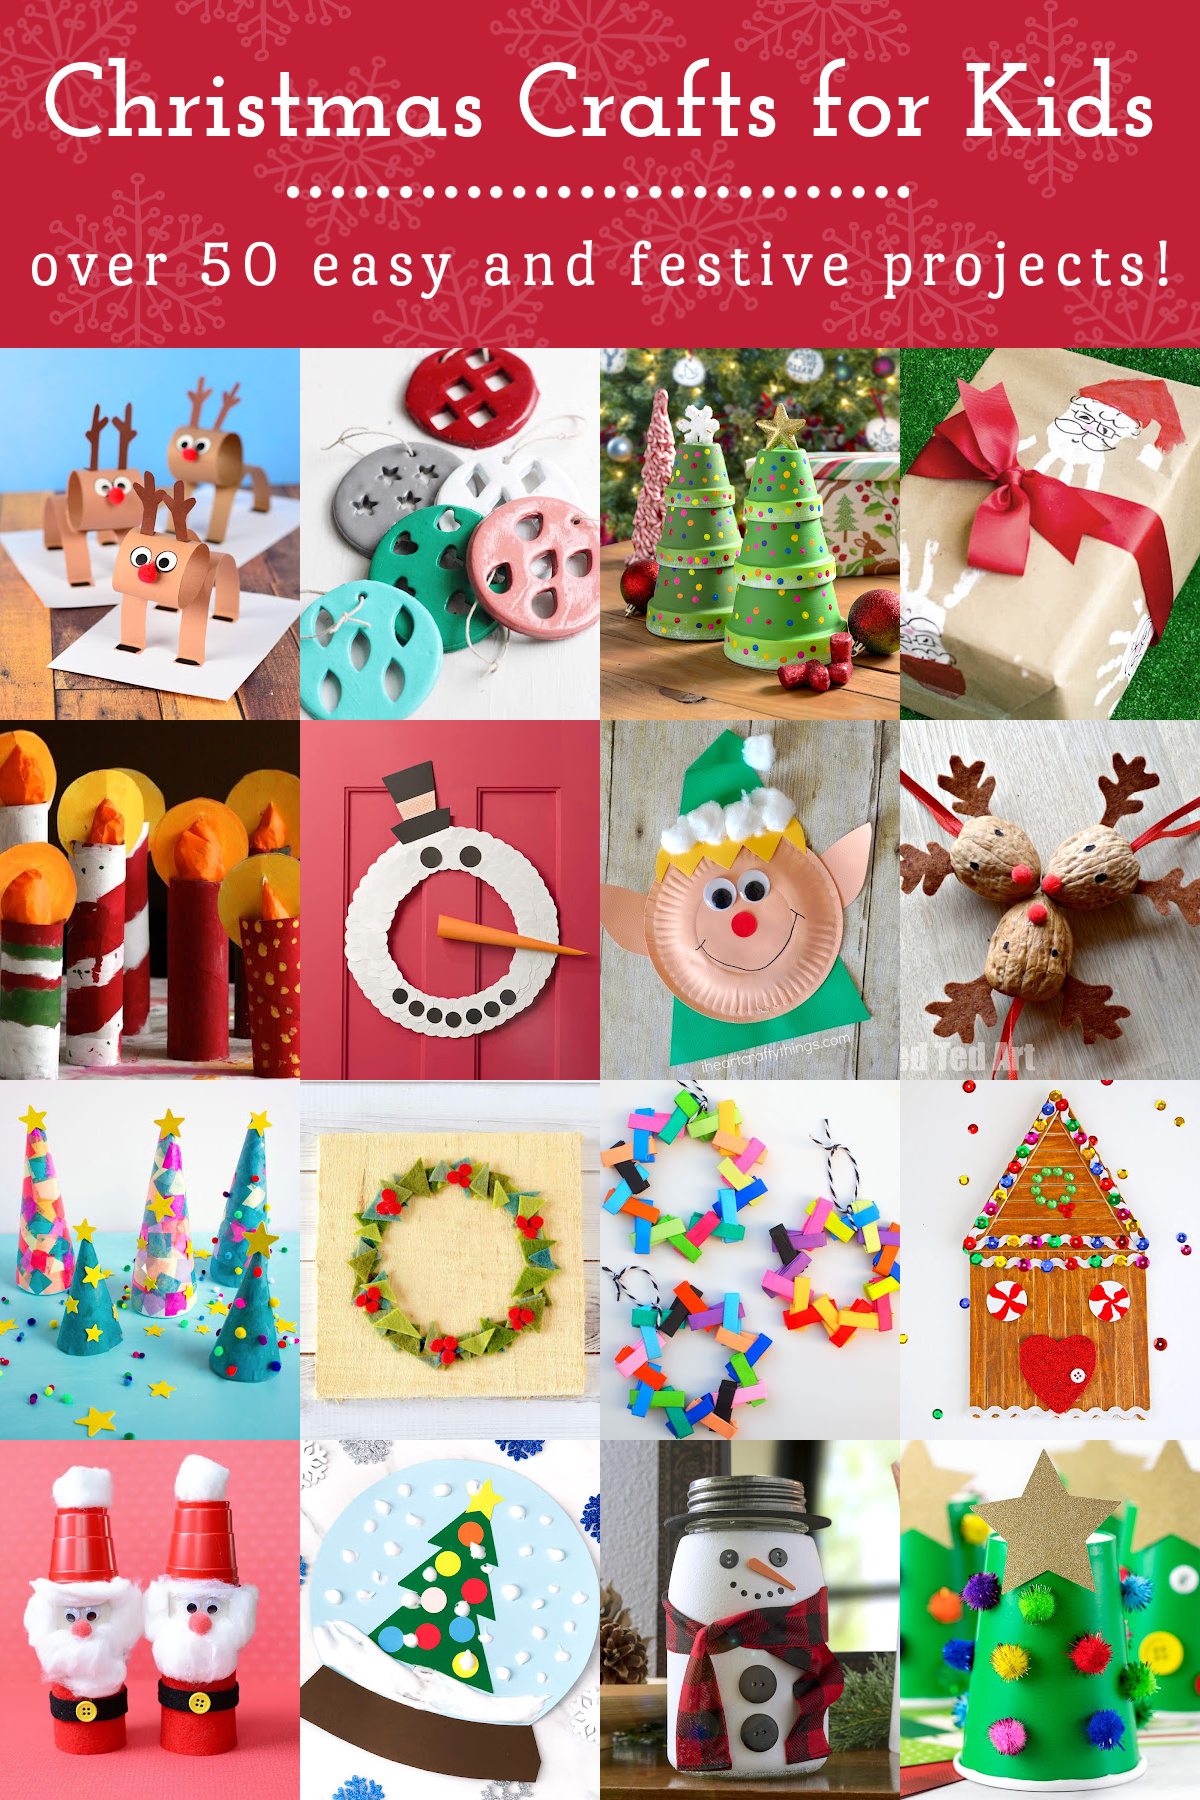 Christmas Paper Crafts for Kids